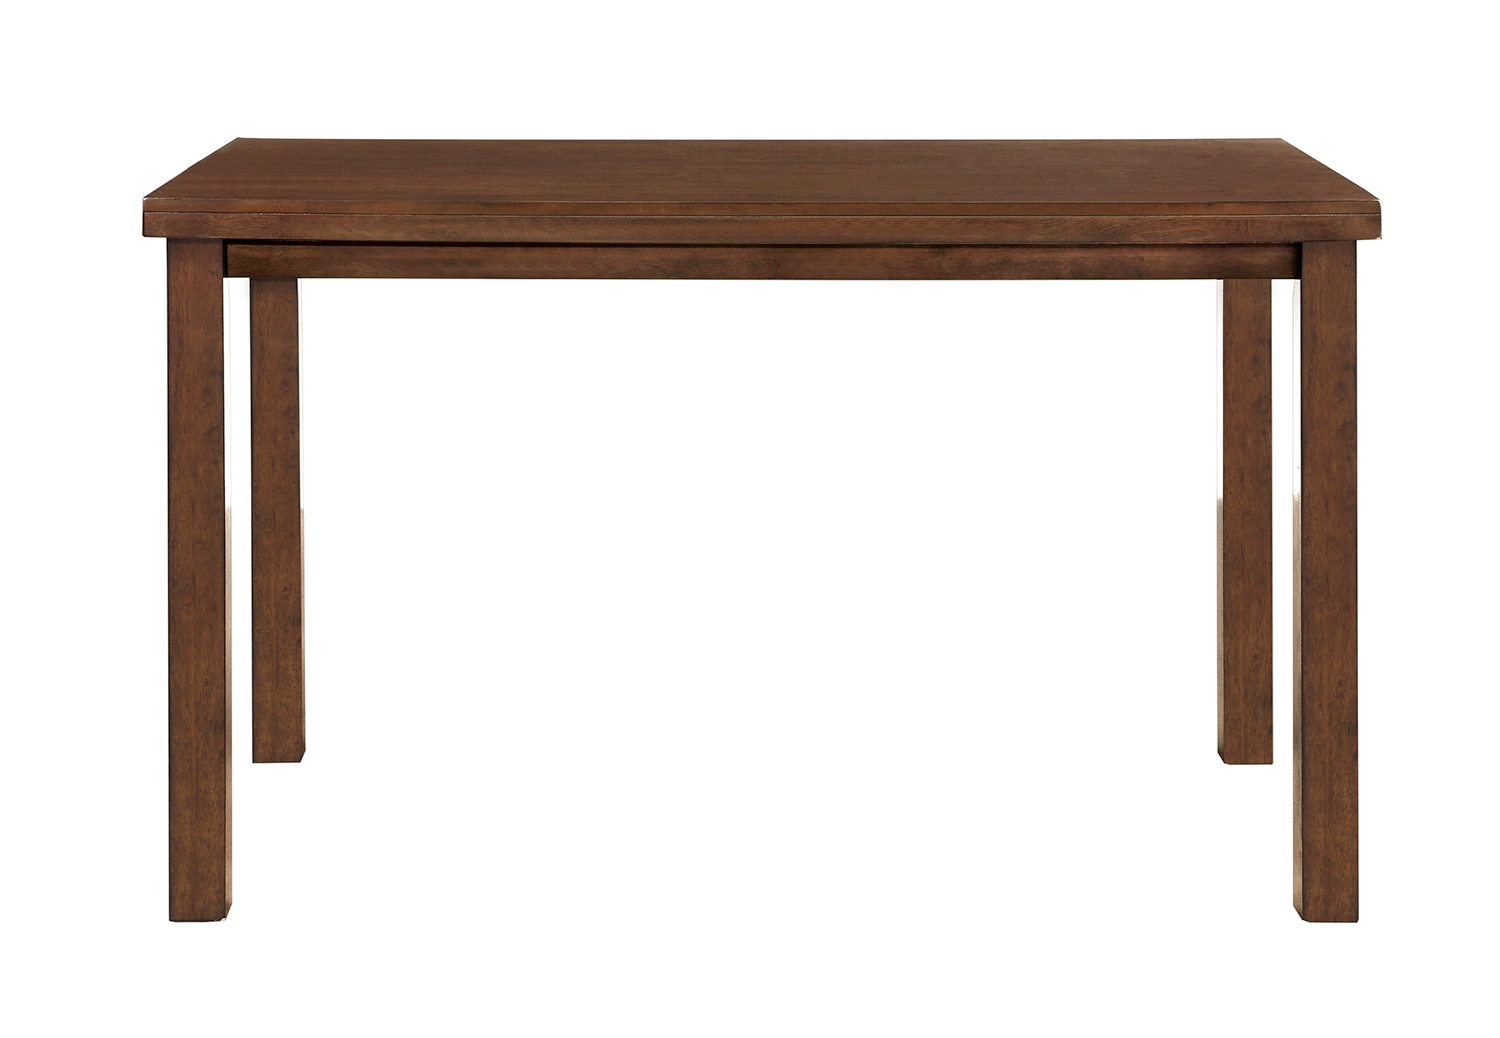 Homelegance Brindle Counter Height Dining Table - Brown